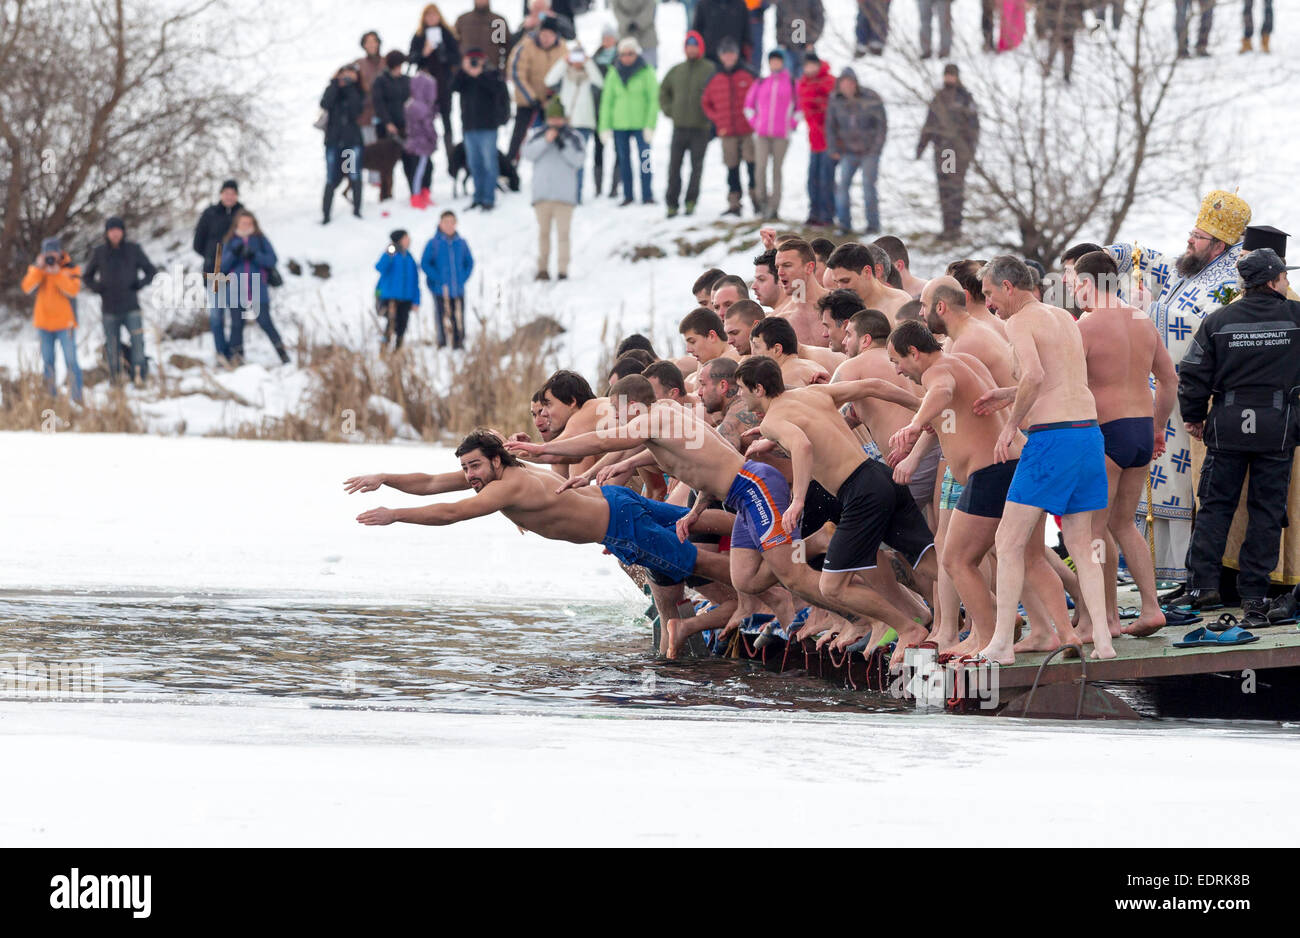 Sofia, Bulgaria - January 6, 2015: Men are jumping into a frozen lake waters for a wooden cross at Epiphany day celebration in B Stock Photo